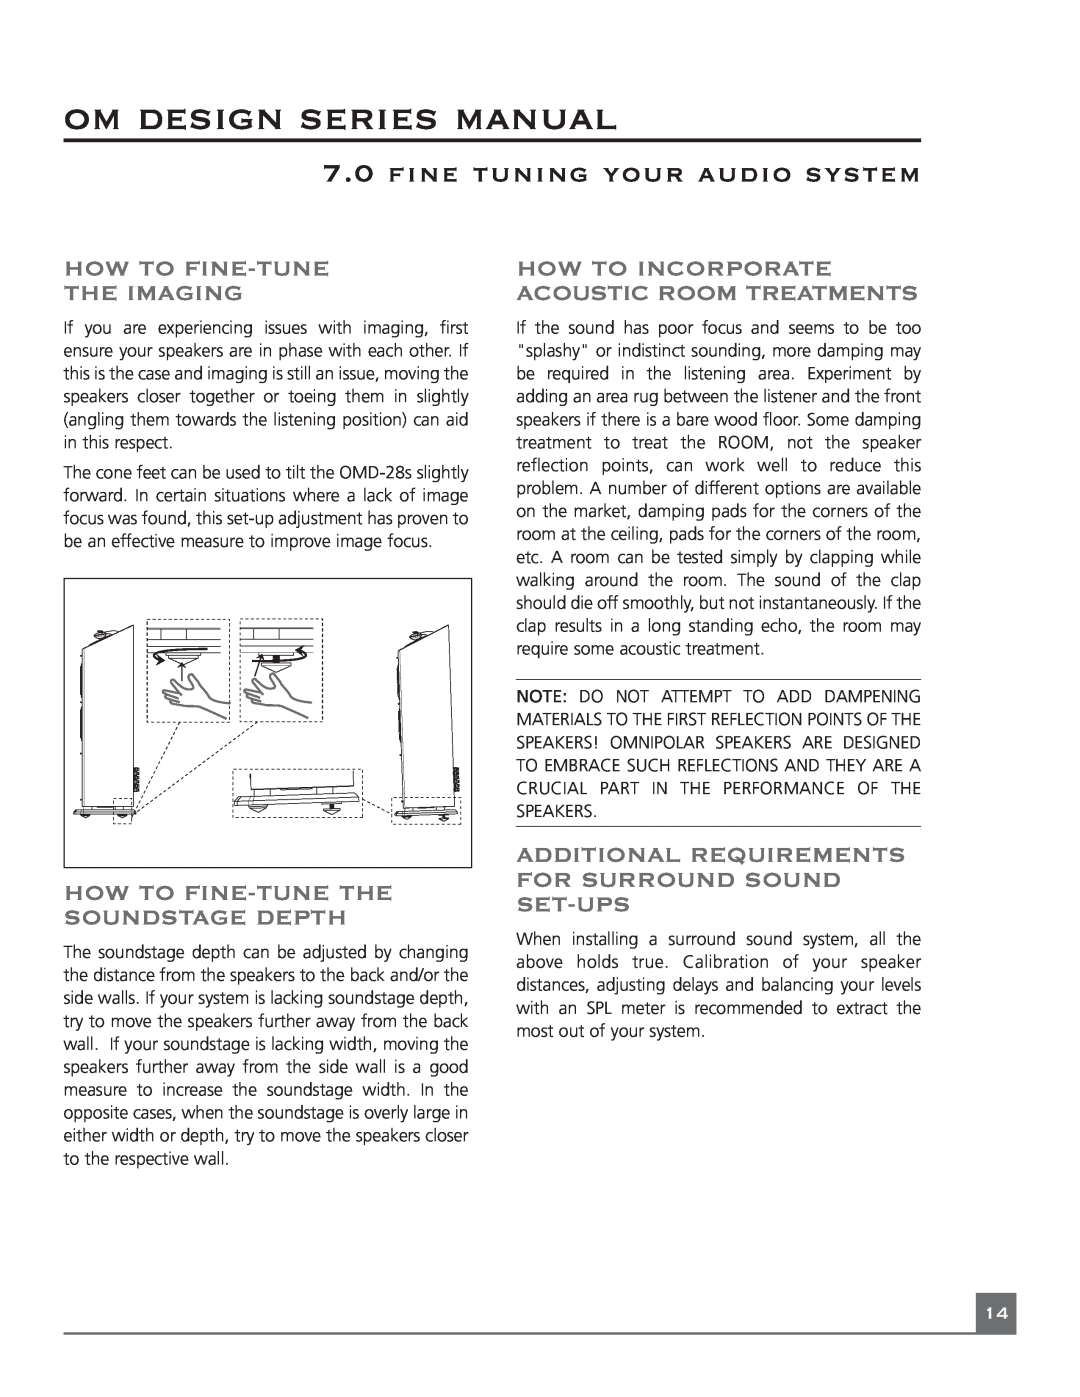 Mirage Loudspeakers OM DESIGN SERIES manual How To Fine-Tune The Imaging, How To Incorporate Acoustic Room Treatments 